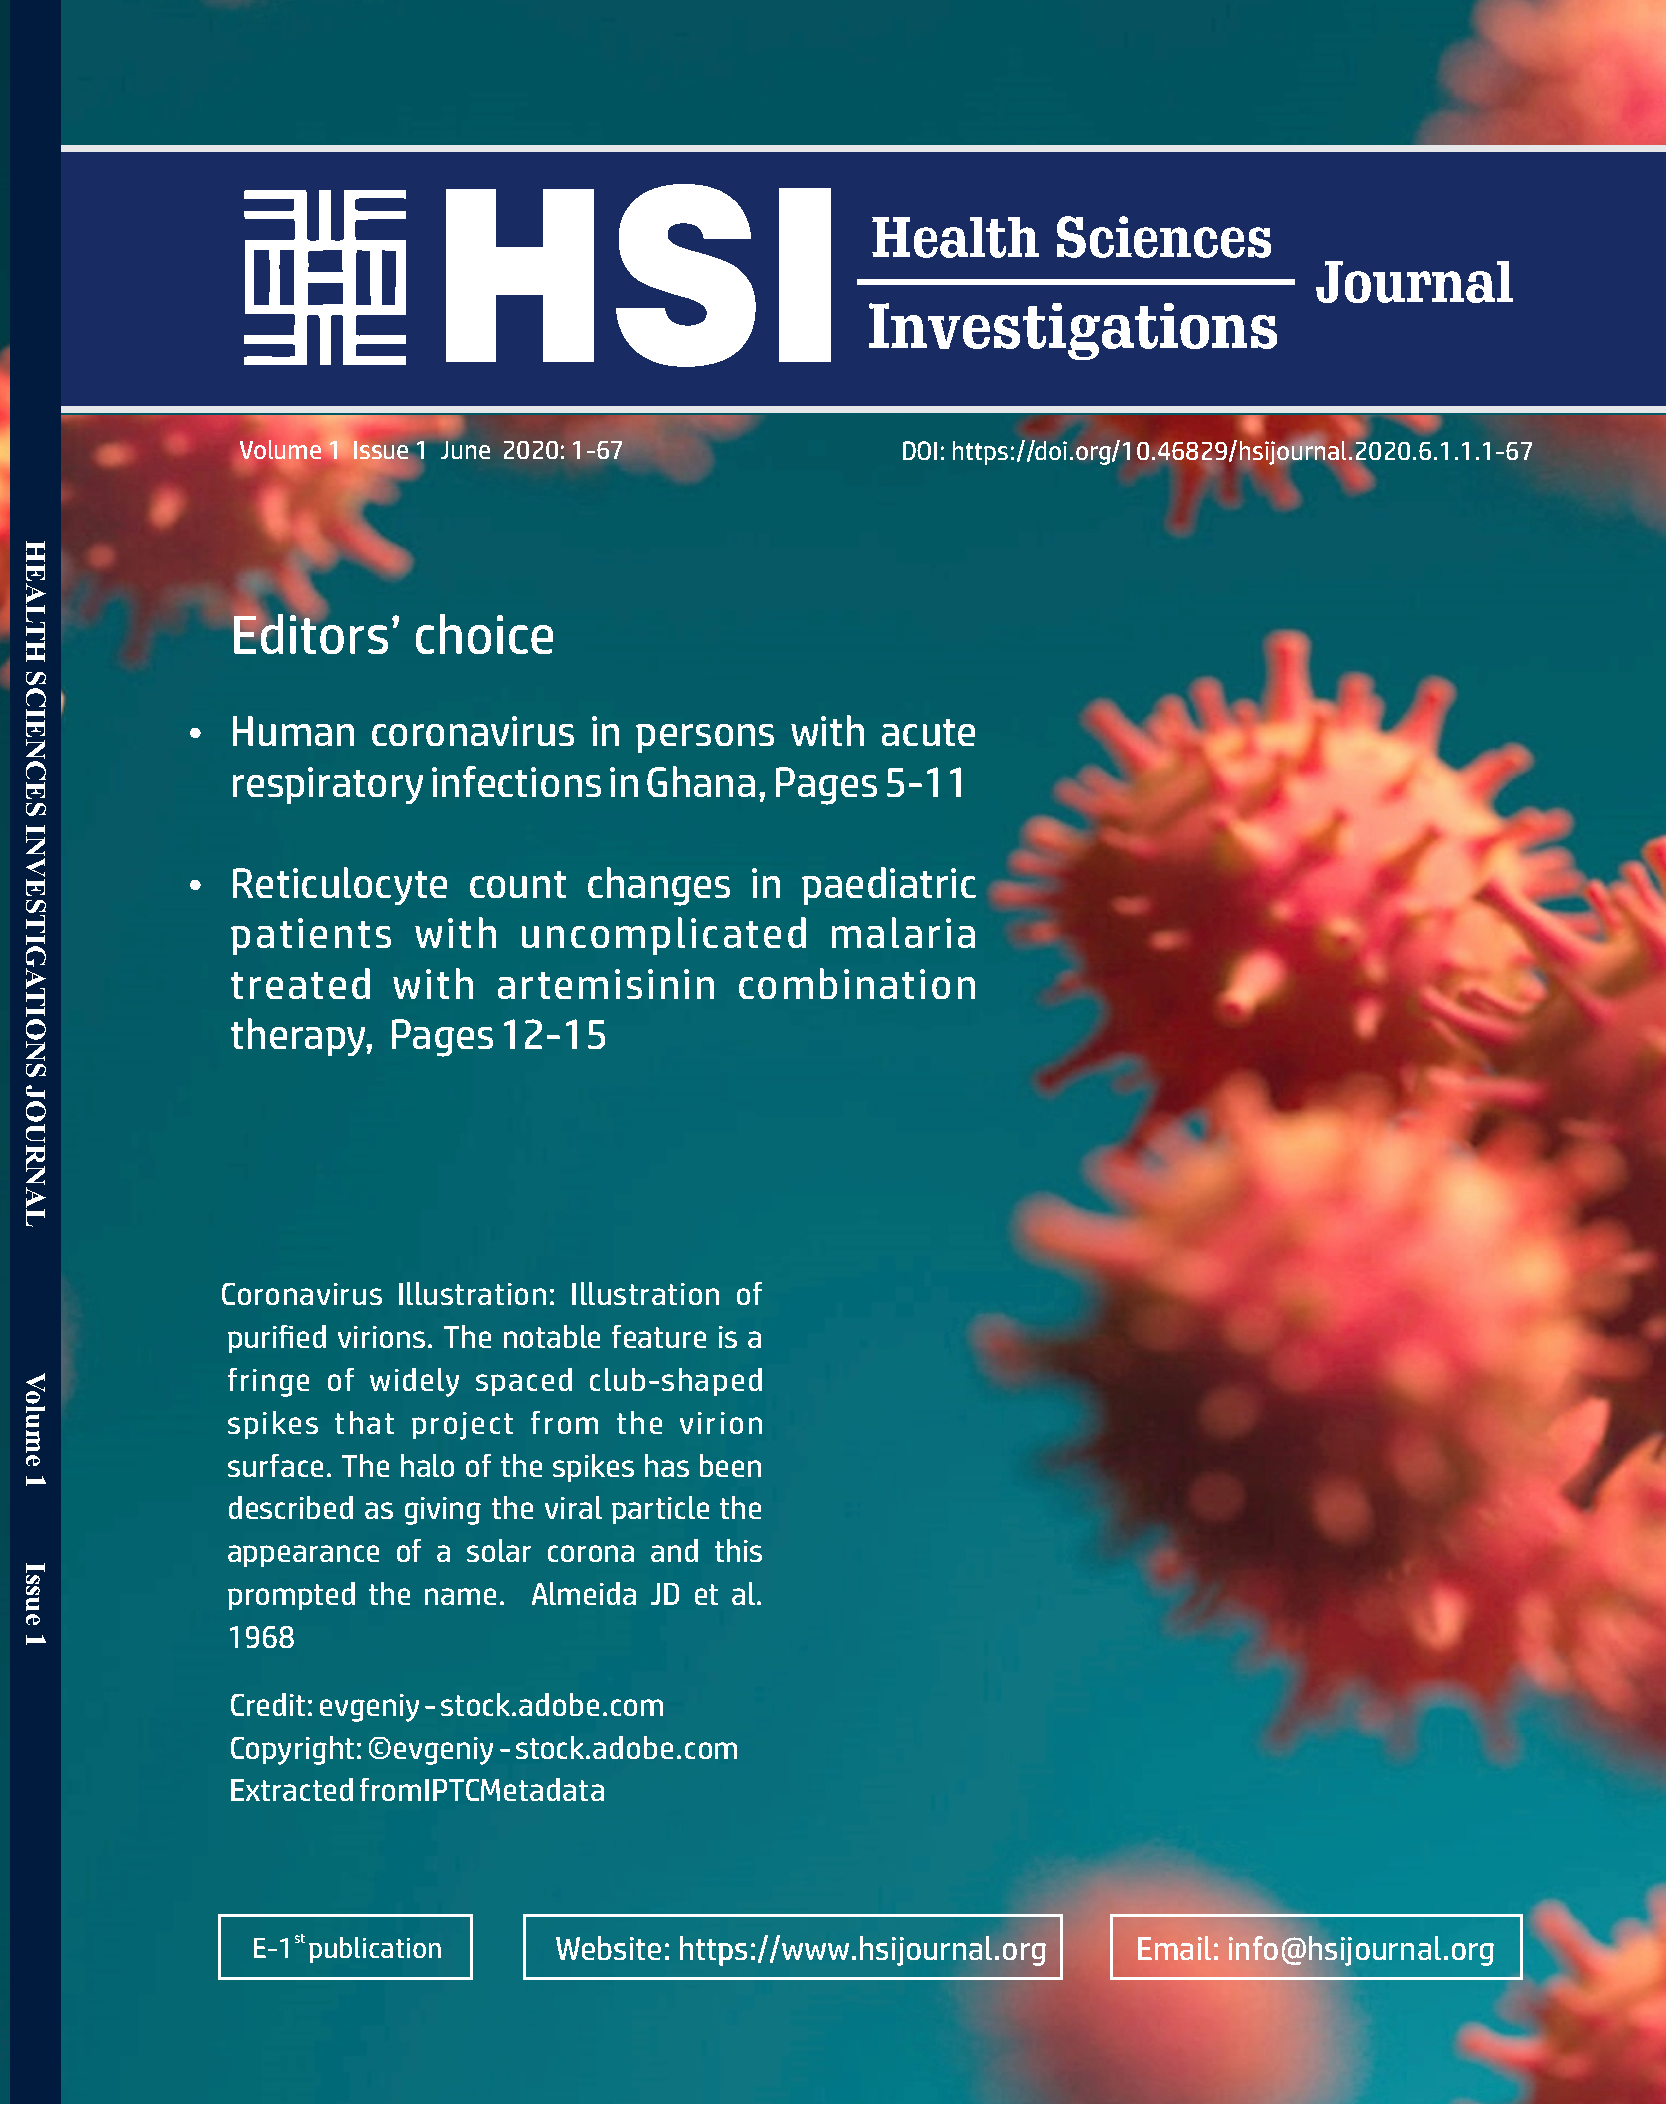 Health Sciences Investigations Journal 